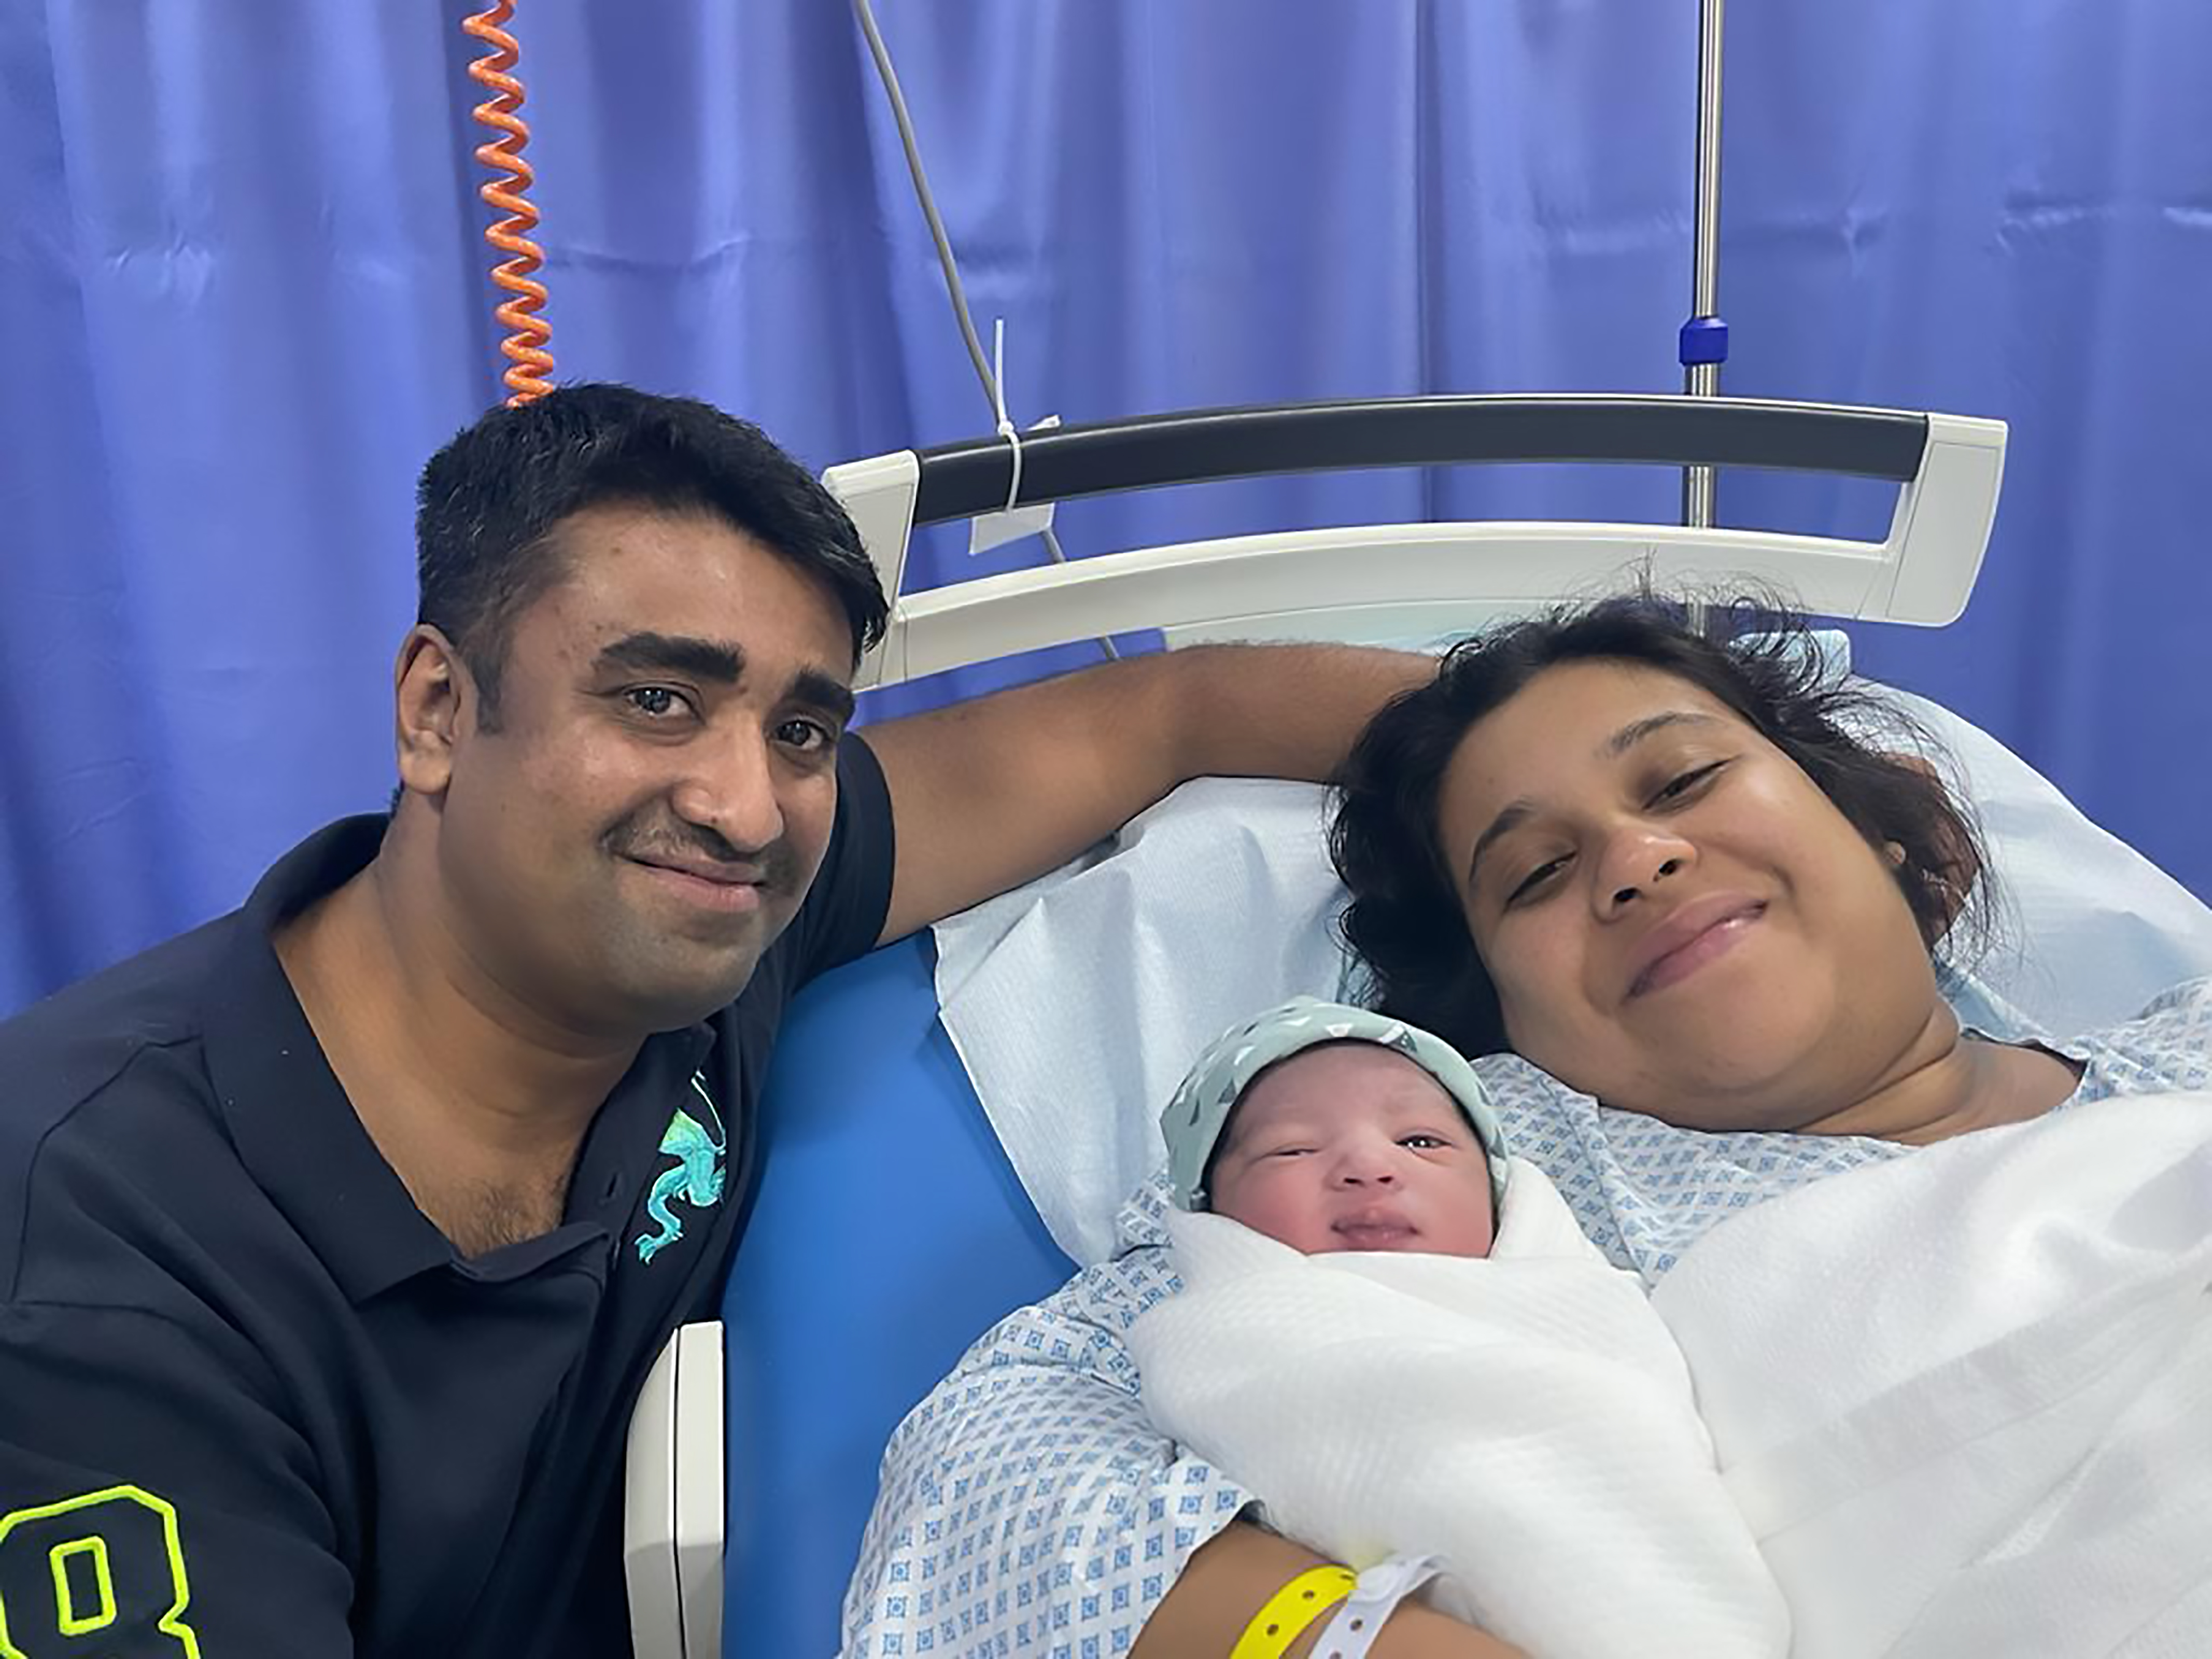 New Year kids: UAE welcomes first babies of 2022 exactly at